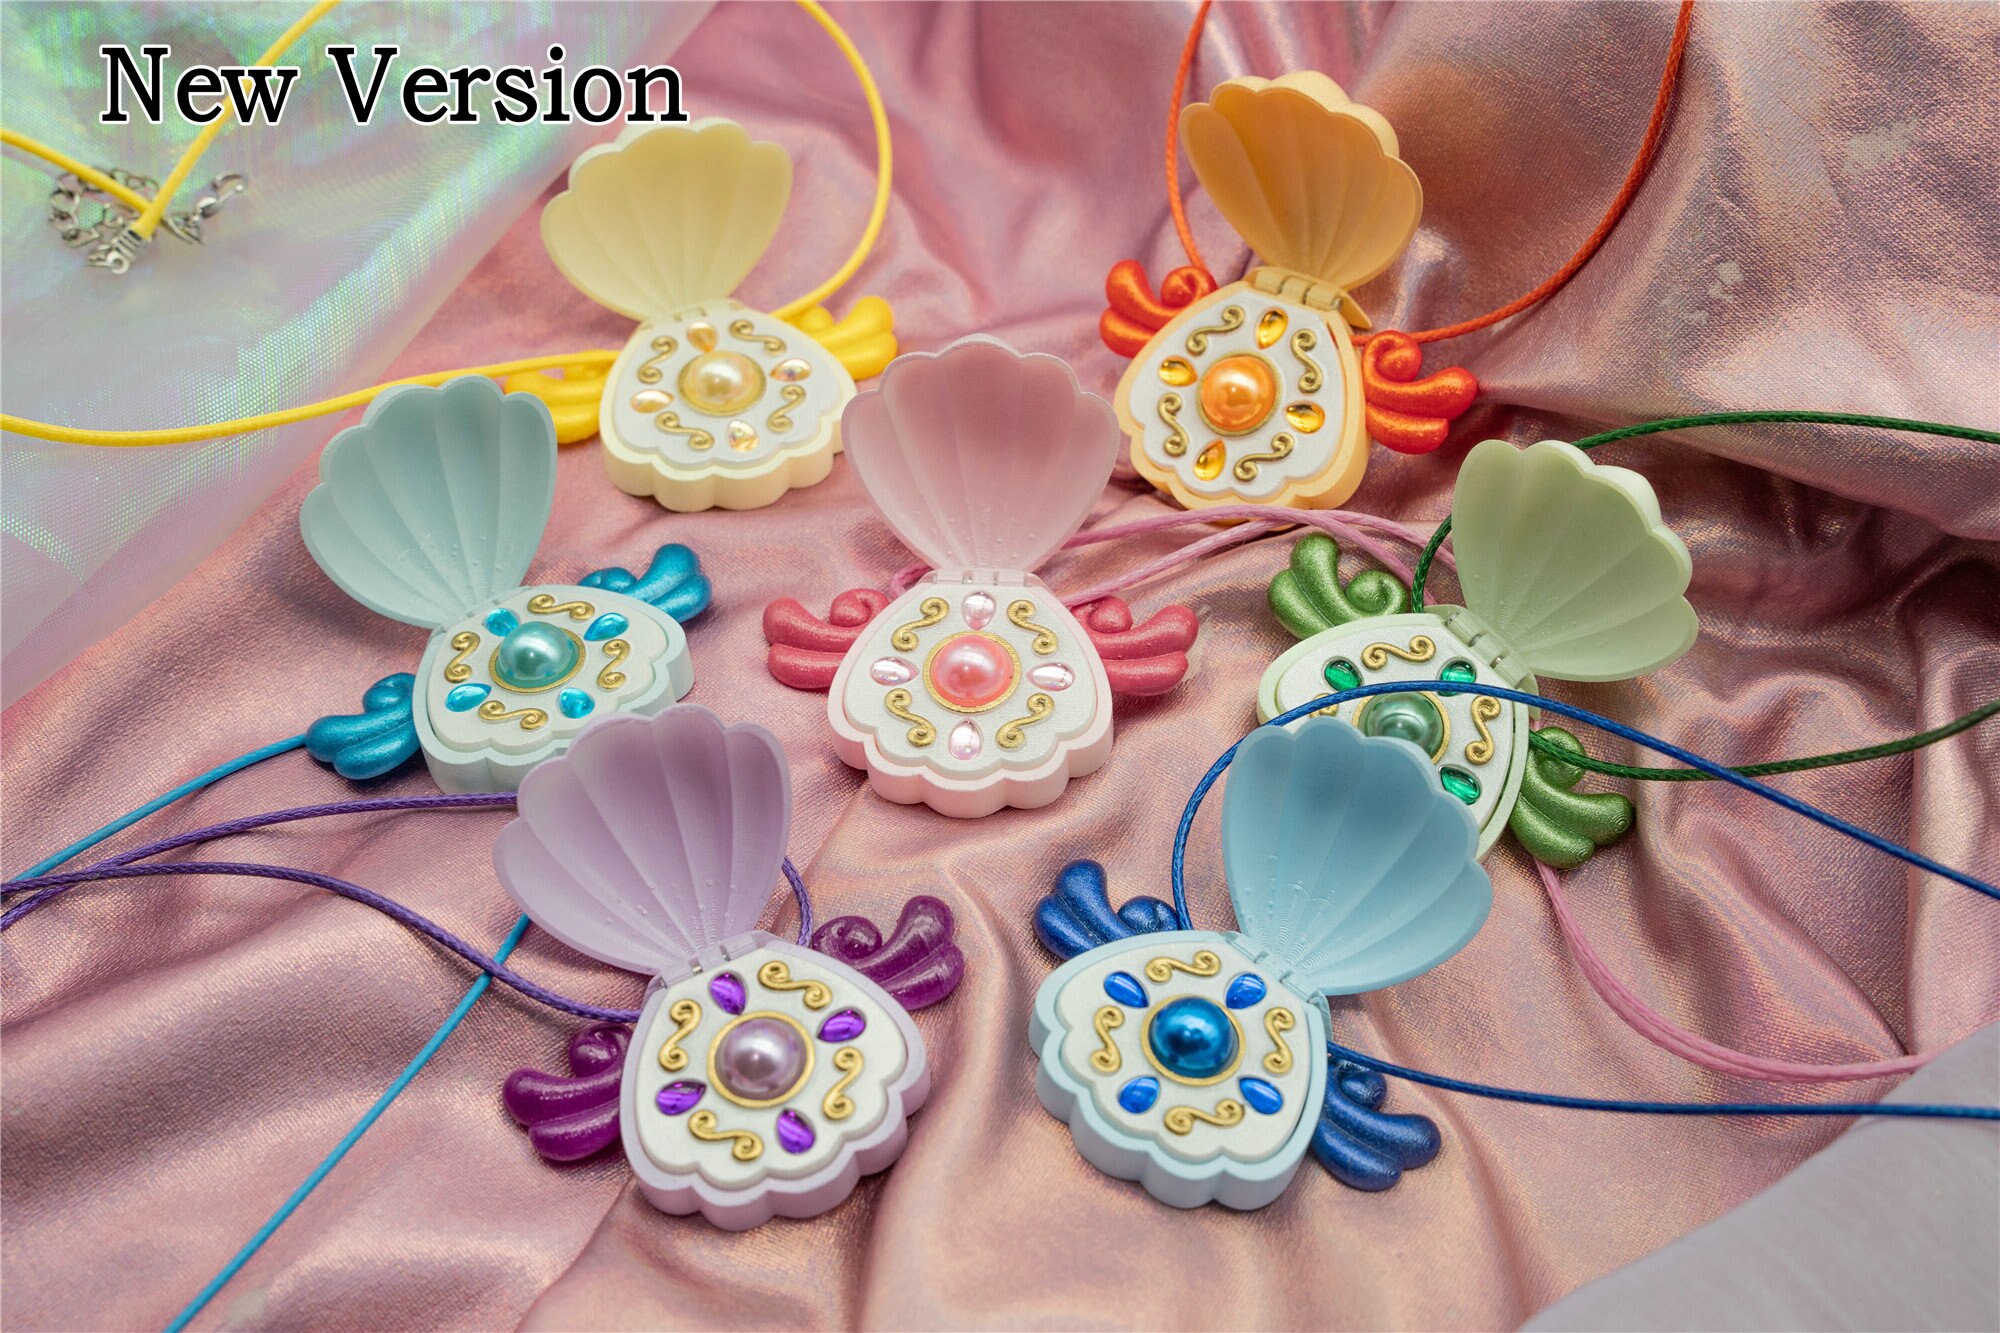 Necklaces Mermaid Melody Pichi Pitch PShell Pendant Necklace For Women  Girls Lucia Rina Toin Hanon Hosho Noel Cosplay Jewelry Gifts From Gyahu,  $14.02 | DHgate.Com